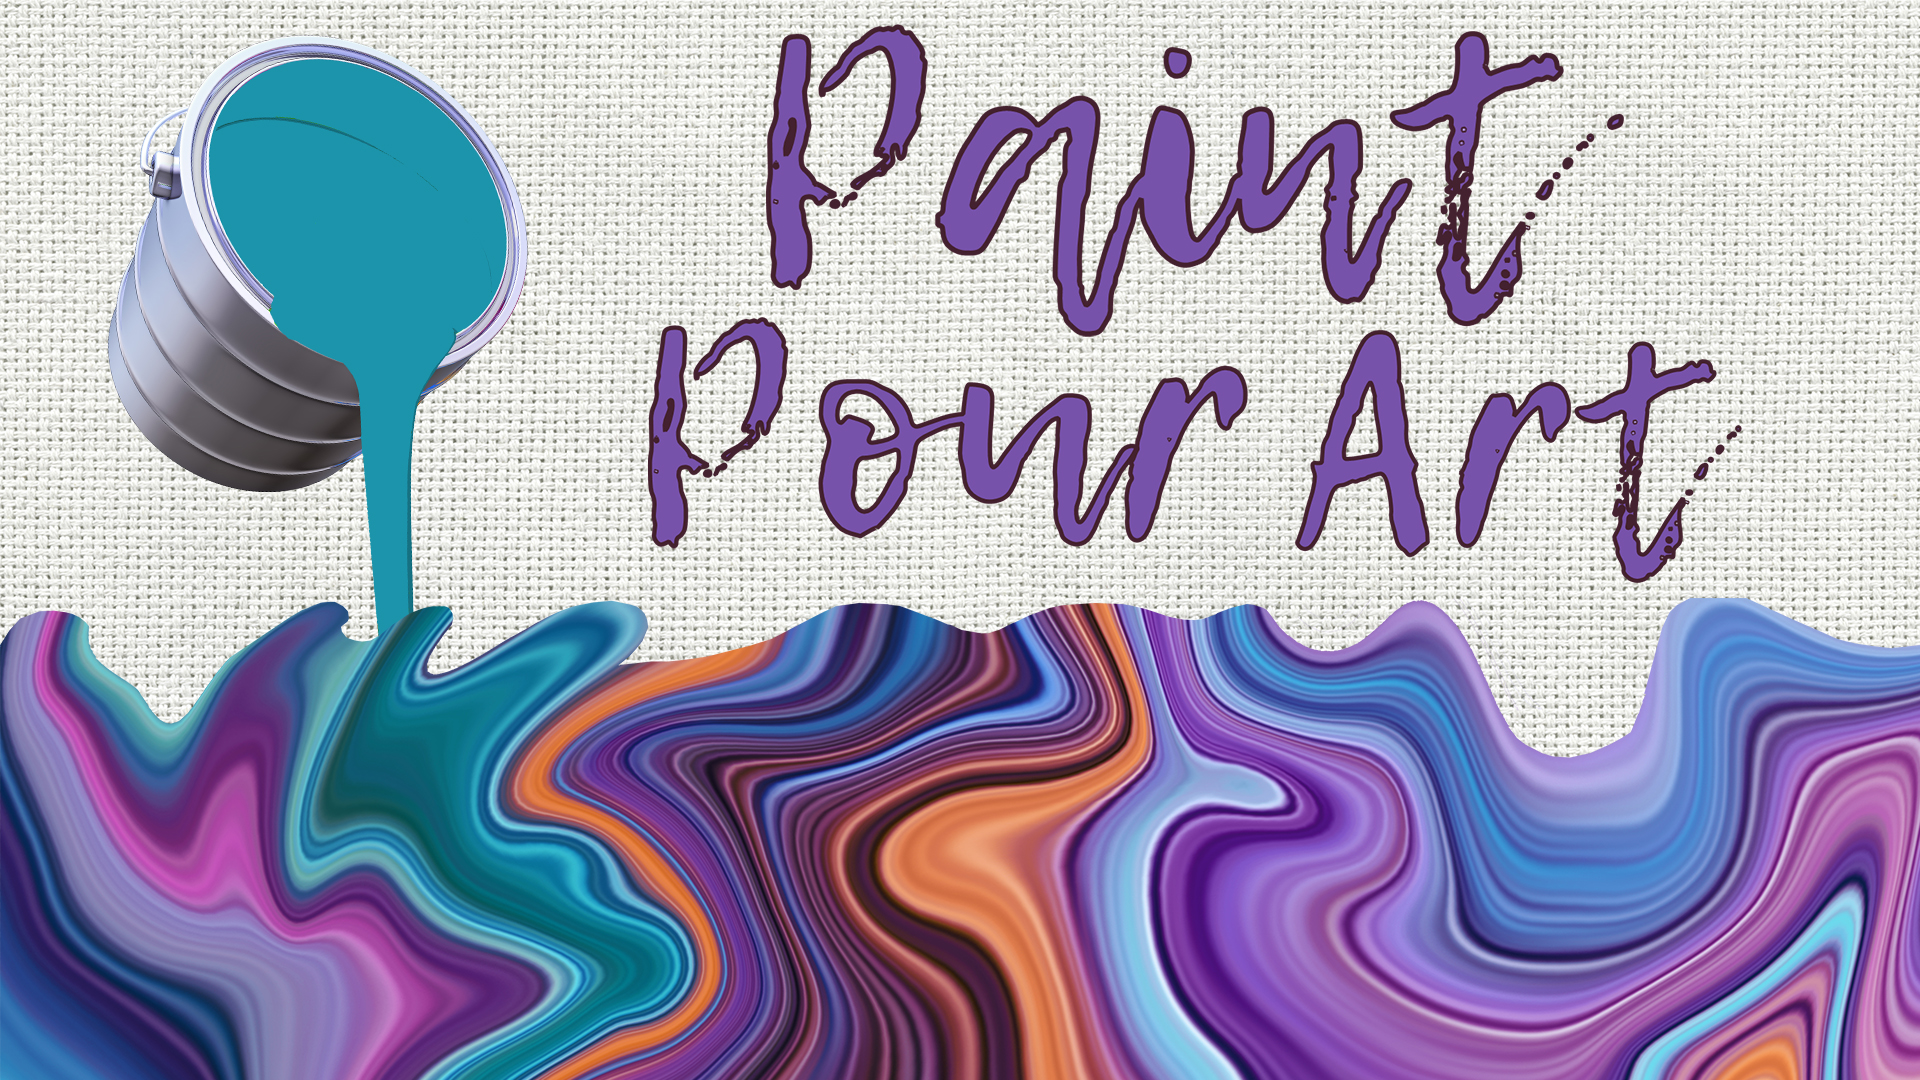 Image reads "Paint Pour Art" against a canvas background. Abstract poured paint art is under the title and a bucket pouring paint is to the left of the title.